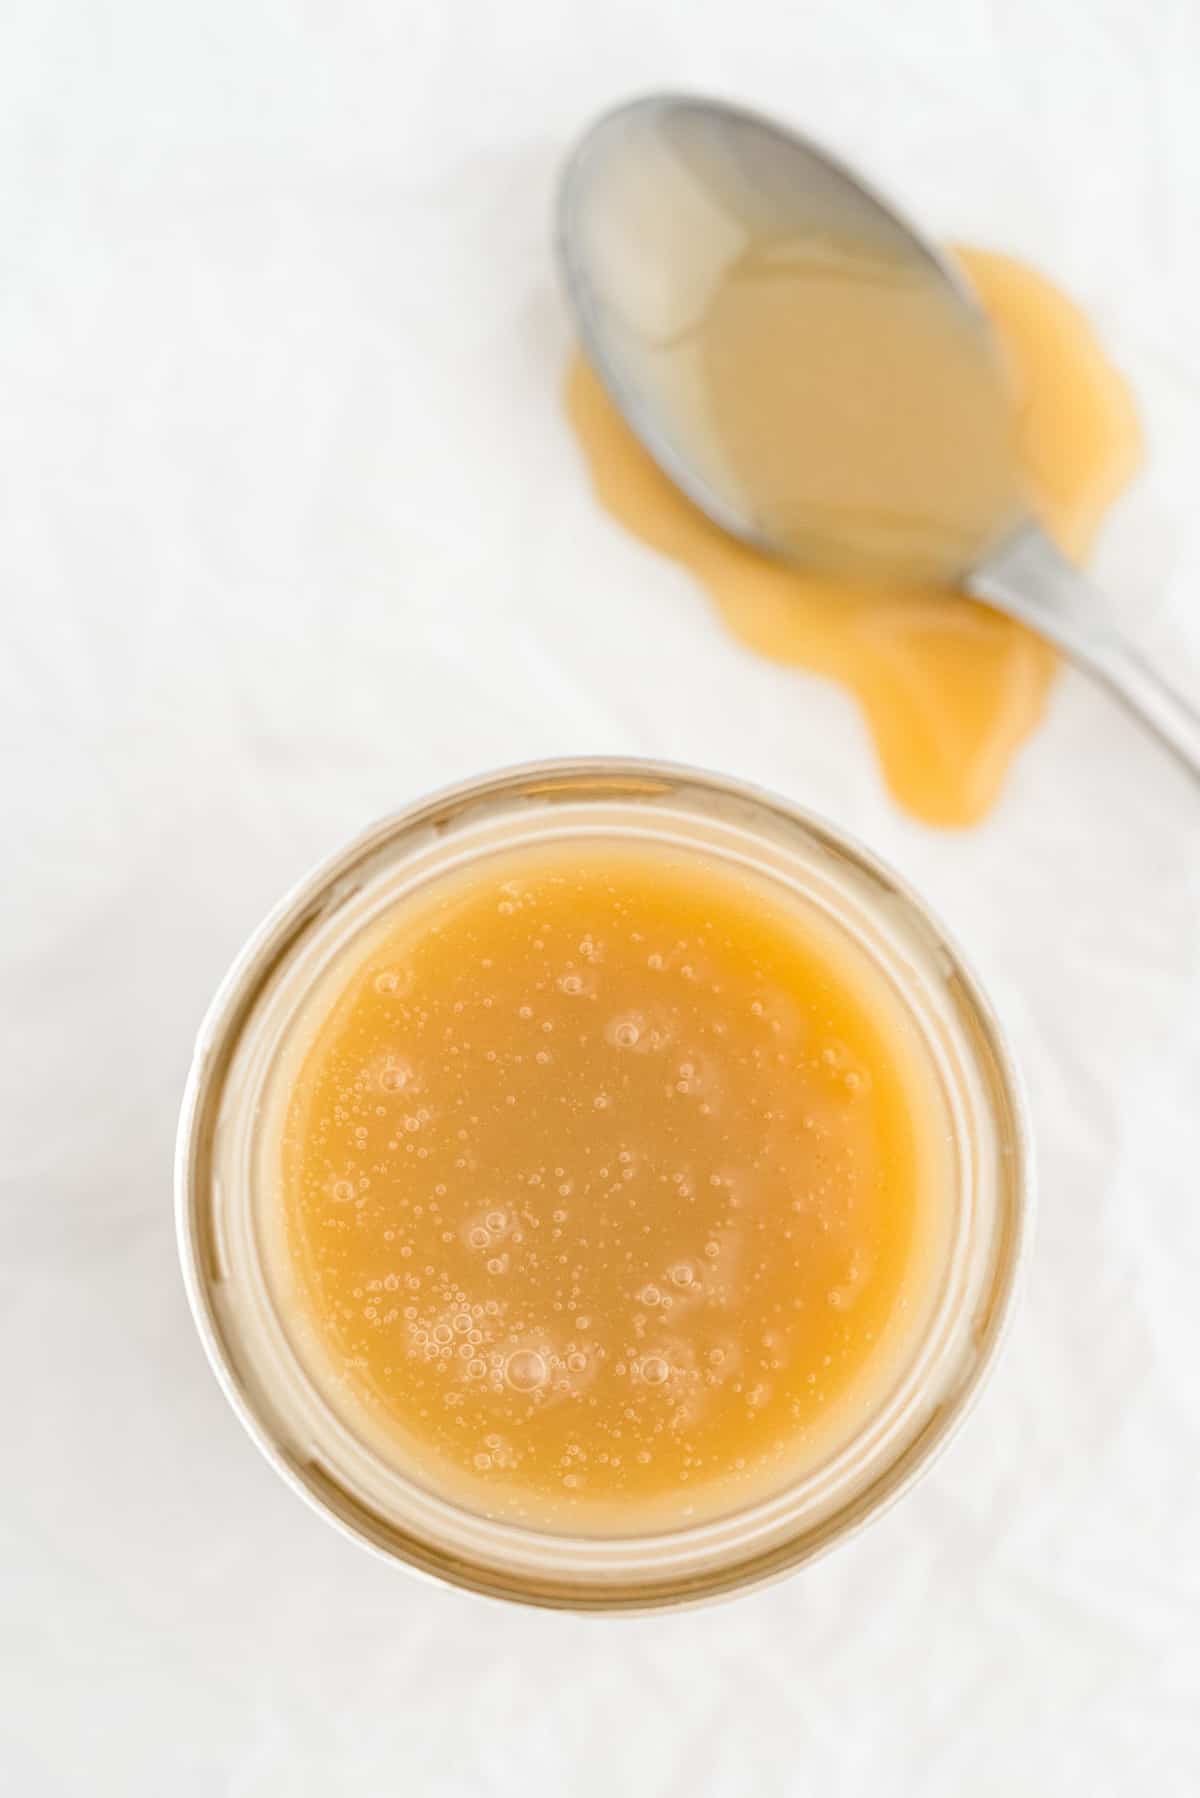 Jar of caramel sauce on a light grey surface, a spoon next to it covered with caramel.